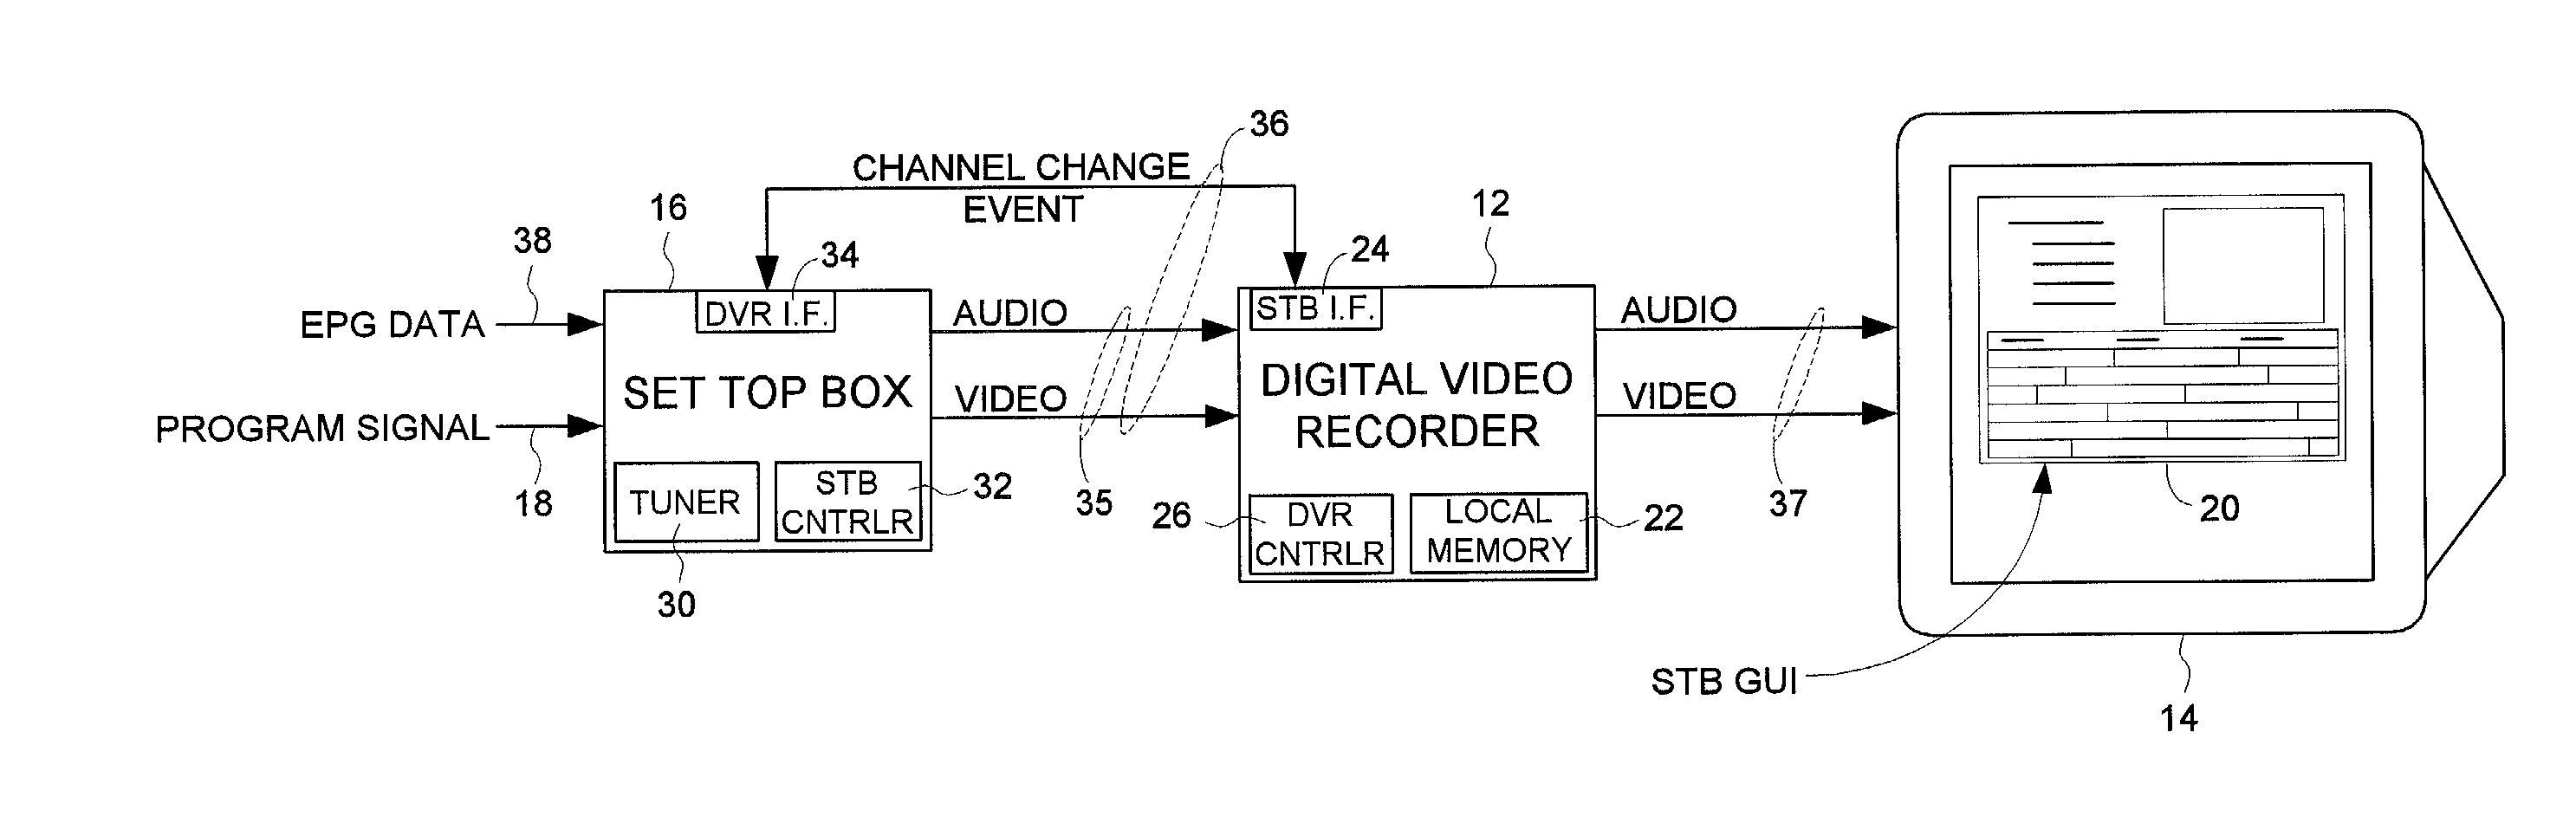 Communicating a channel-change event from a set top box to a digital video recorder